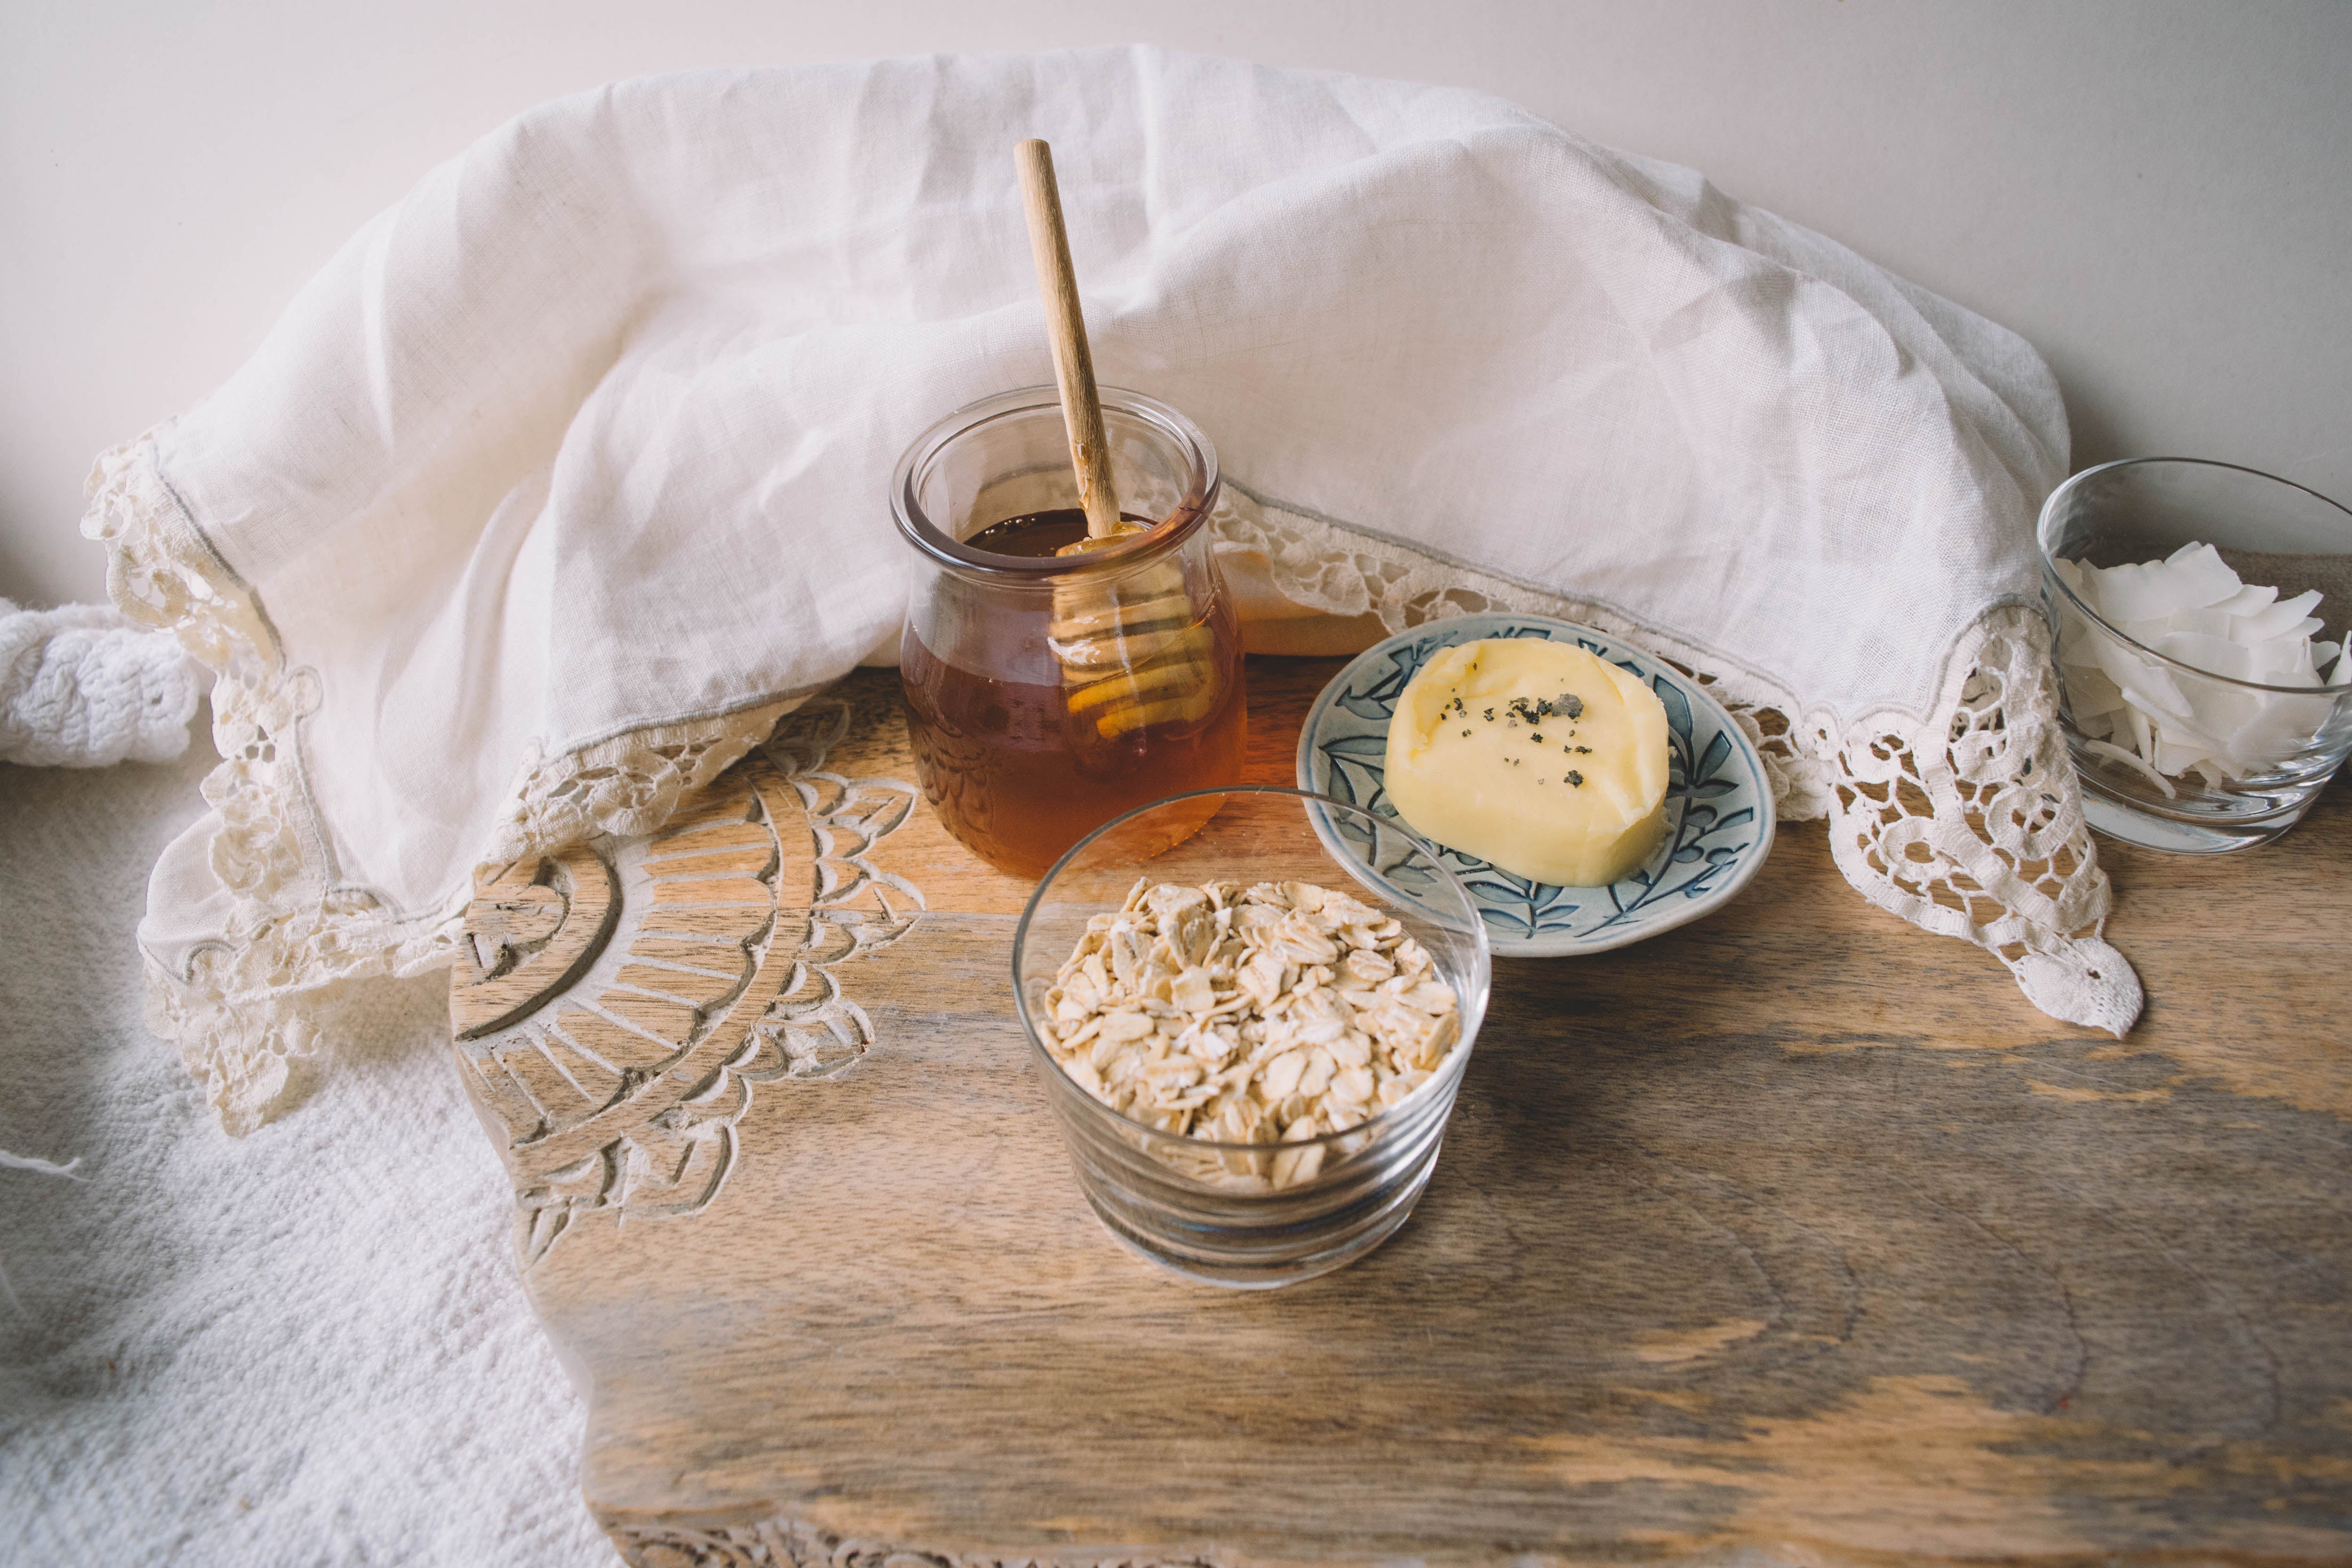 Why ghee is better, why ghee is good for you